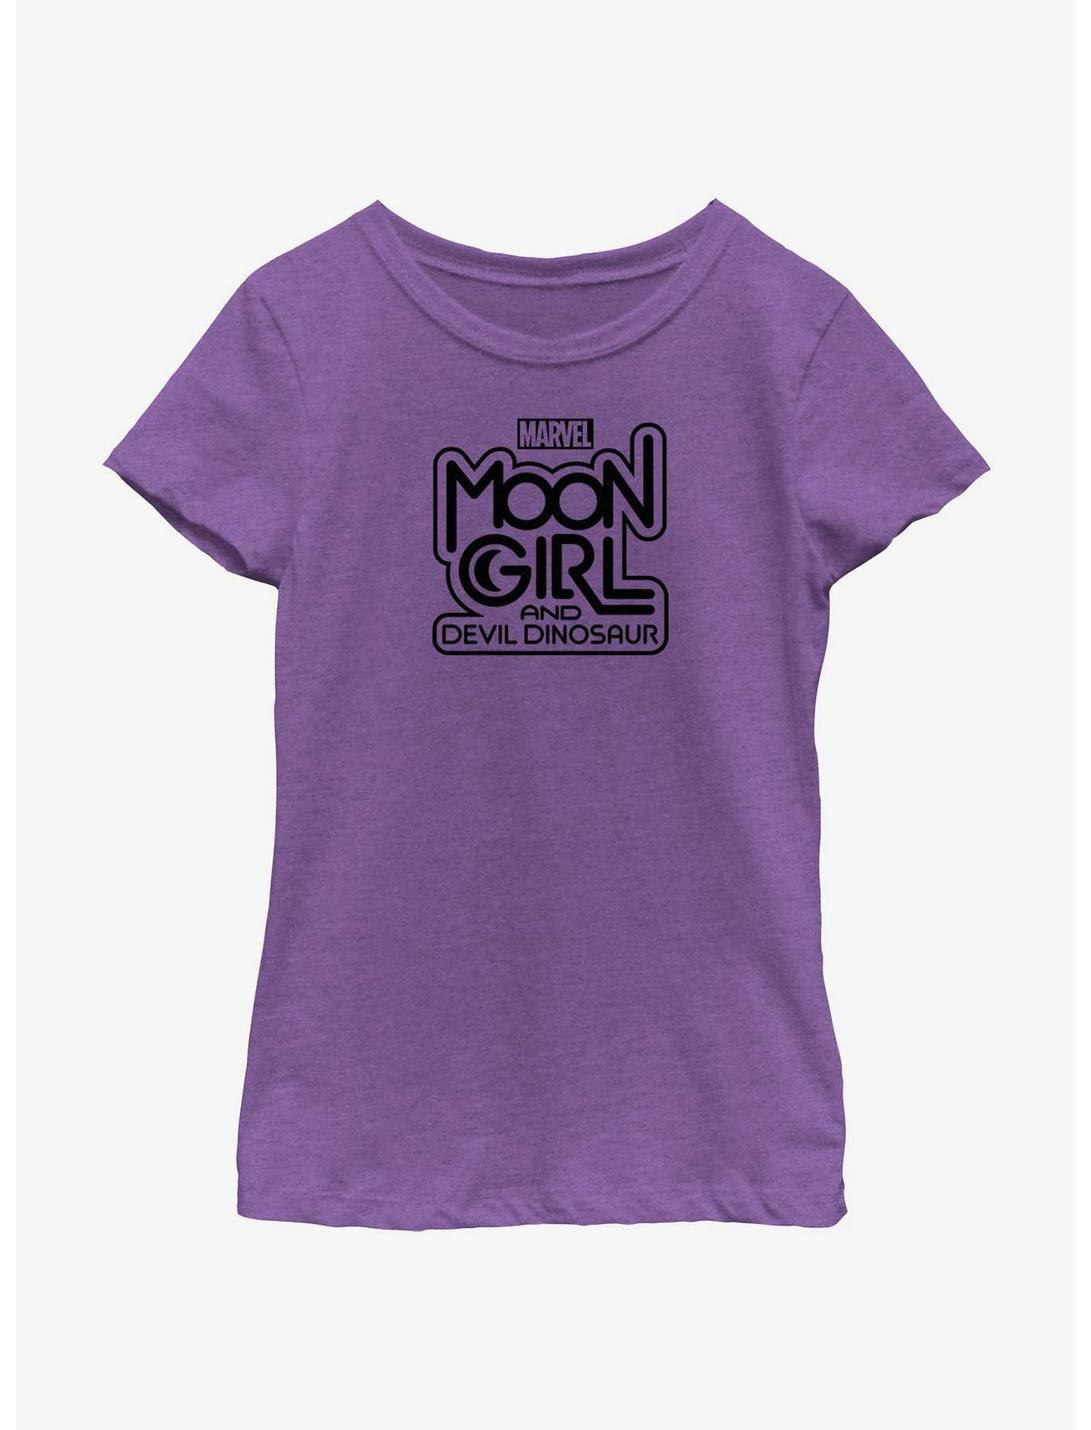 Marvel Moon Girl And Devil Dinosaur Moon Girl Title Youth Girls T-Shirt, PURPLE BERRY, hi-res